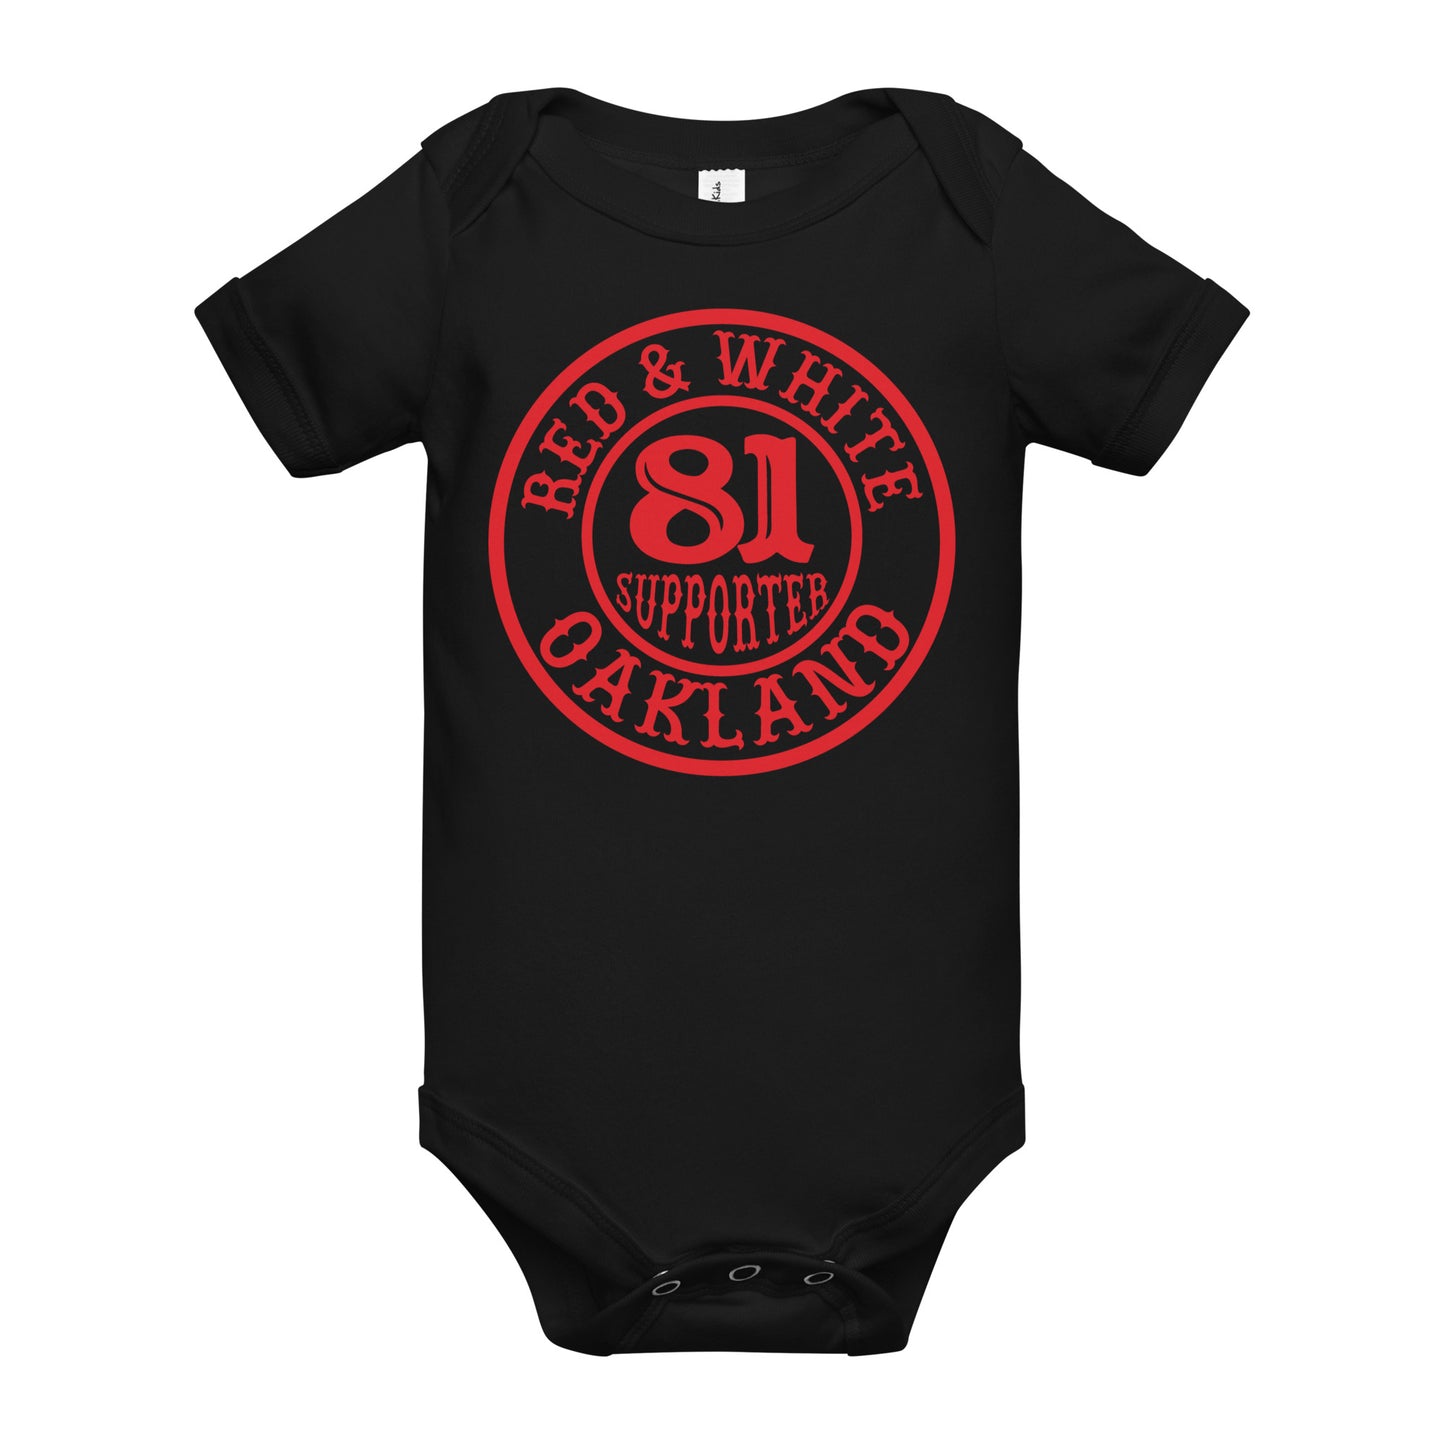 Support 81 Oakland -Baby short sleeve one piece